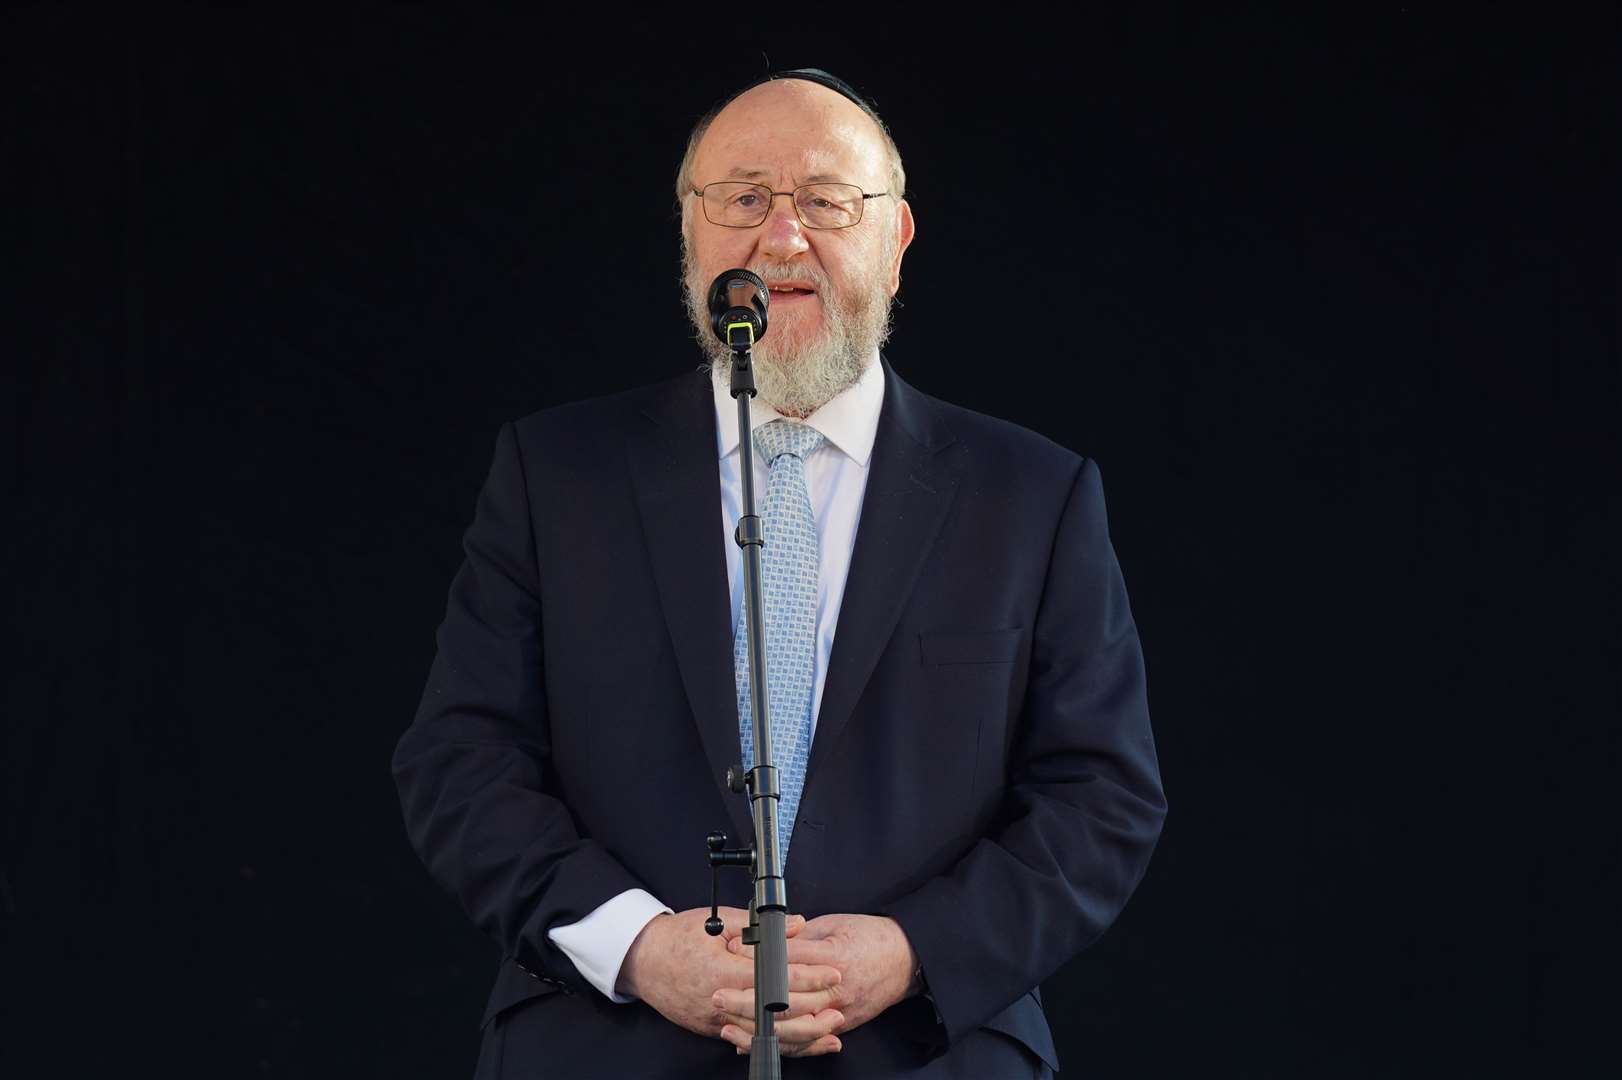 Chief Rabbi Sir Ephraim Mirvis attends a Solidarity Rally with members of the Jewish community in Trafalgar Square, central London (Lucy North/PA)